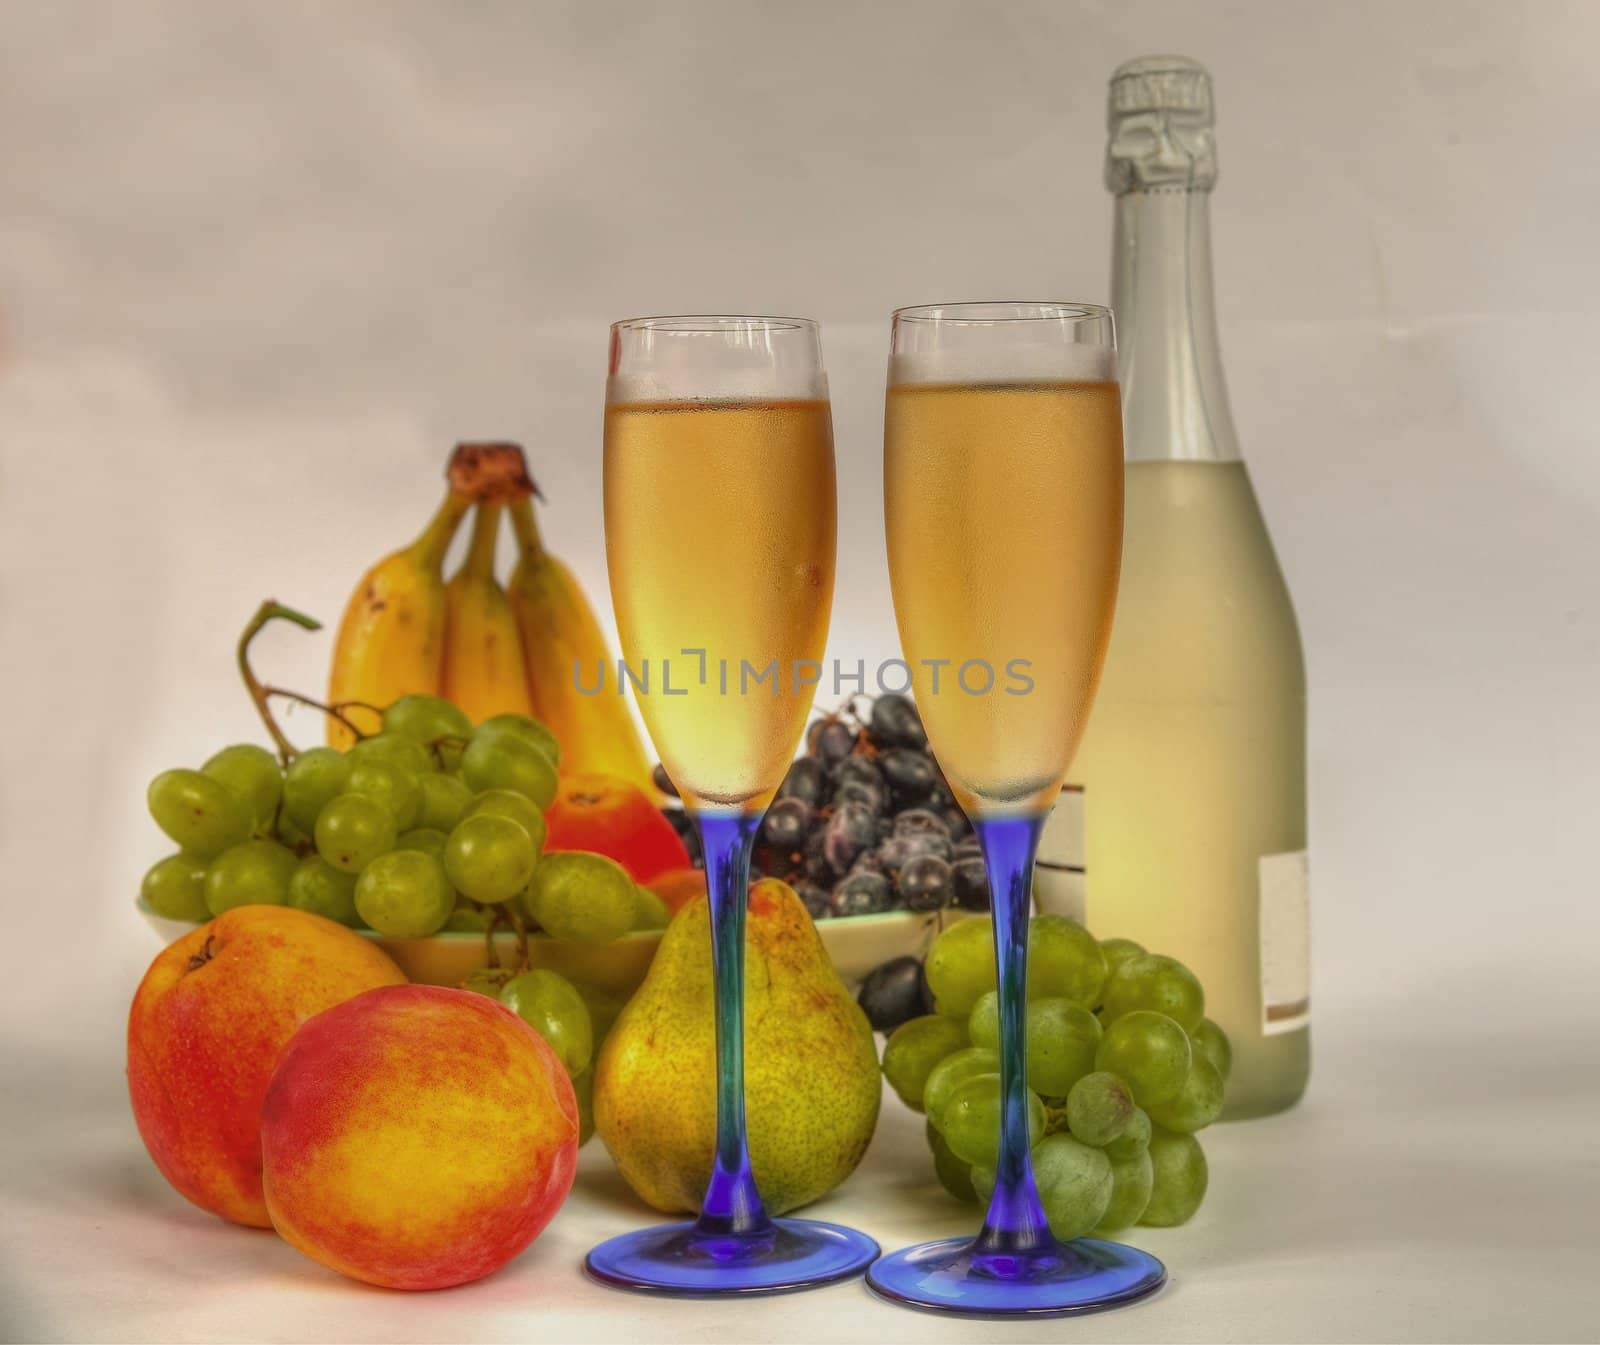 Champagne in glasses,bottle,apples,peach,pear,grapes and banana.